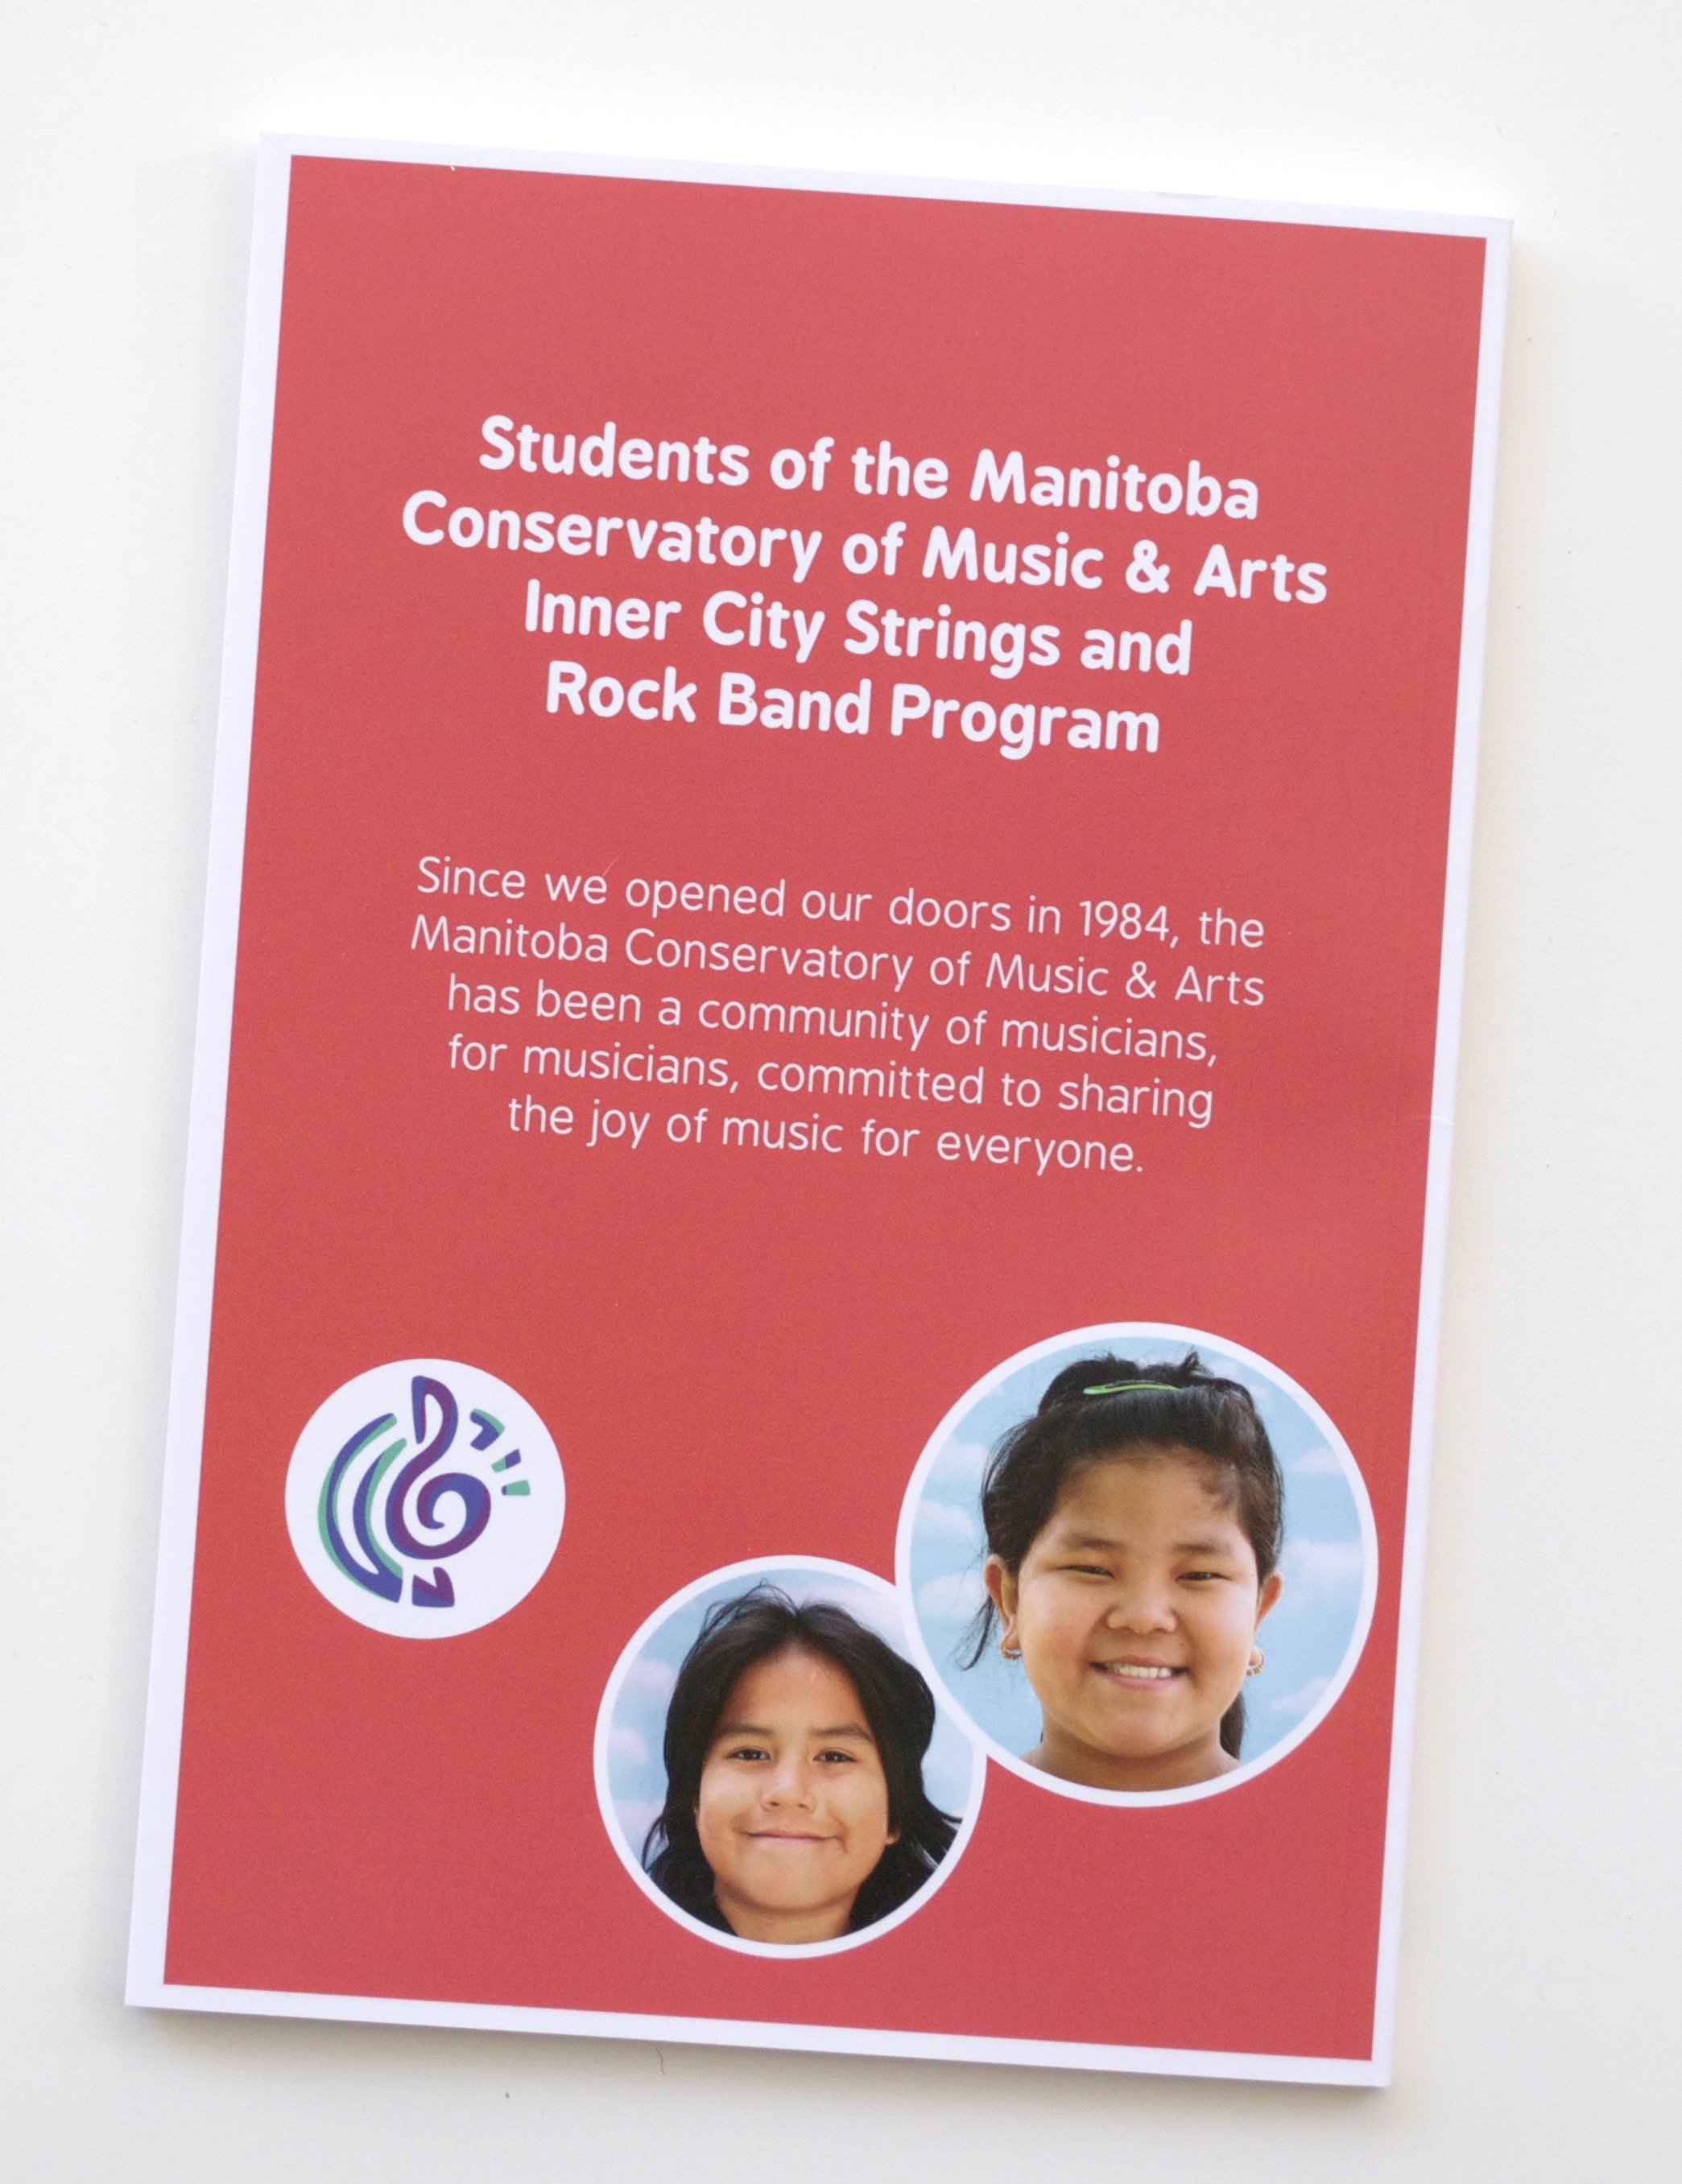    Music Equals  - Fundraising book for the Manitoba Conservatory of Arts &amp; Music Outreach Program   In 2014, I approached the MCMA about creating and designing a fundraising book for their outreach music program focusing on some of the north end